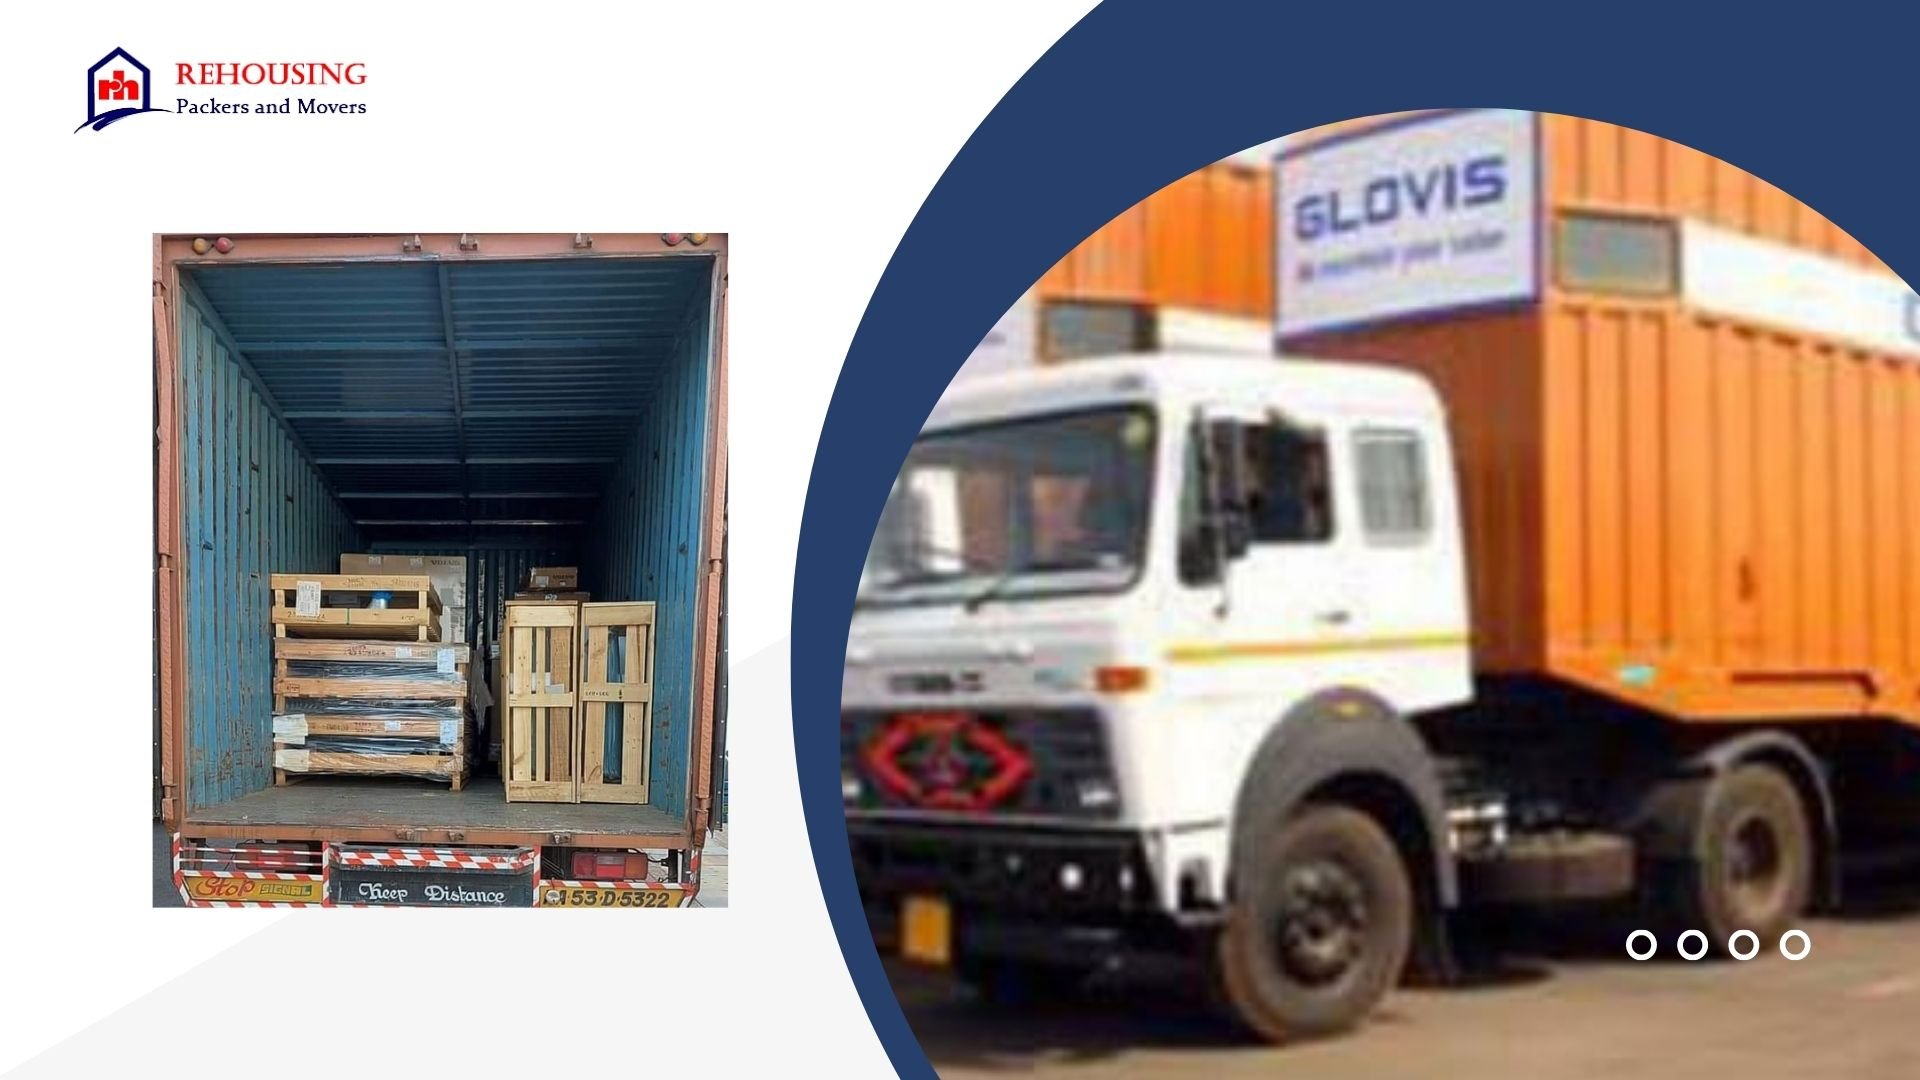 Packers and Movers From Dehradun to Bhubaneswar | Rehousing packers and movers